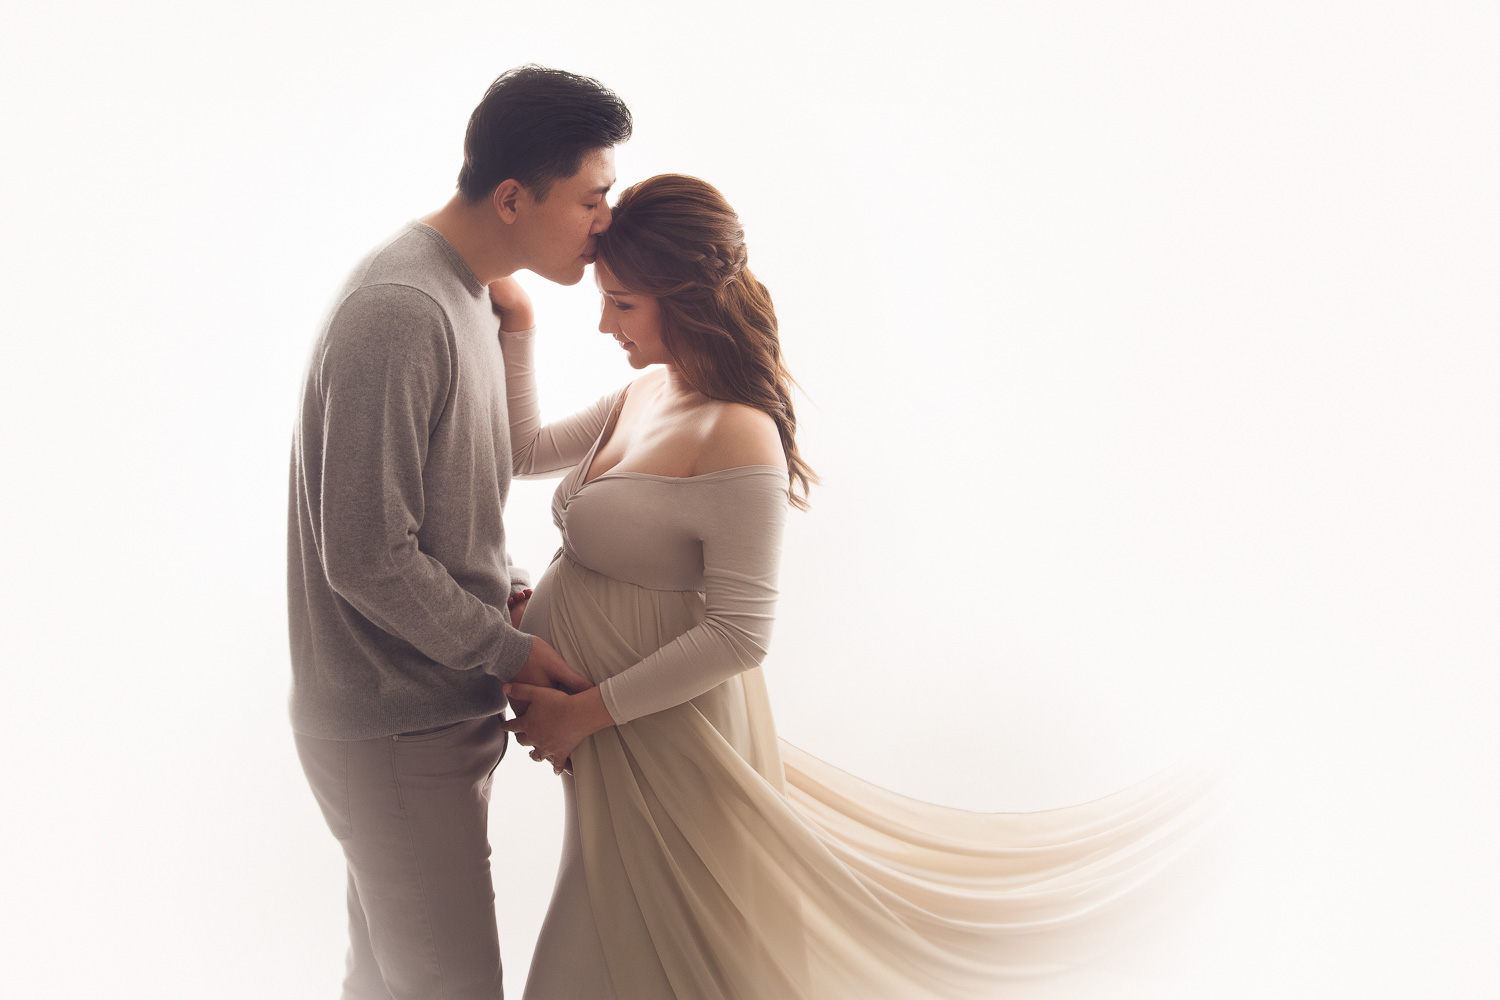 What to expect at your maternity photography session